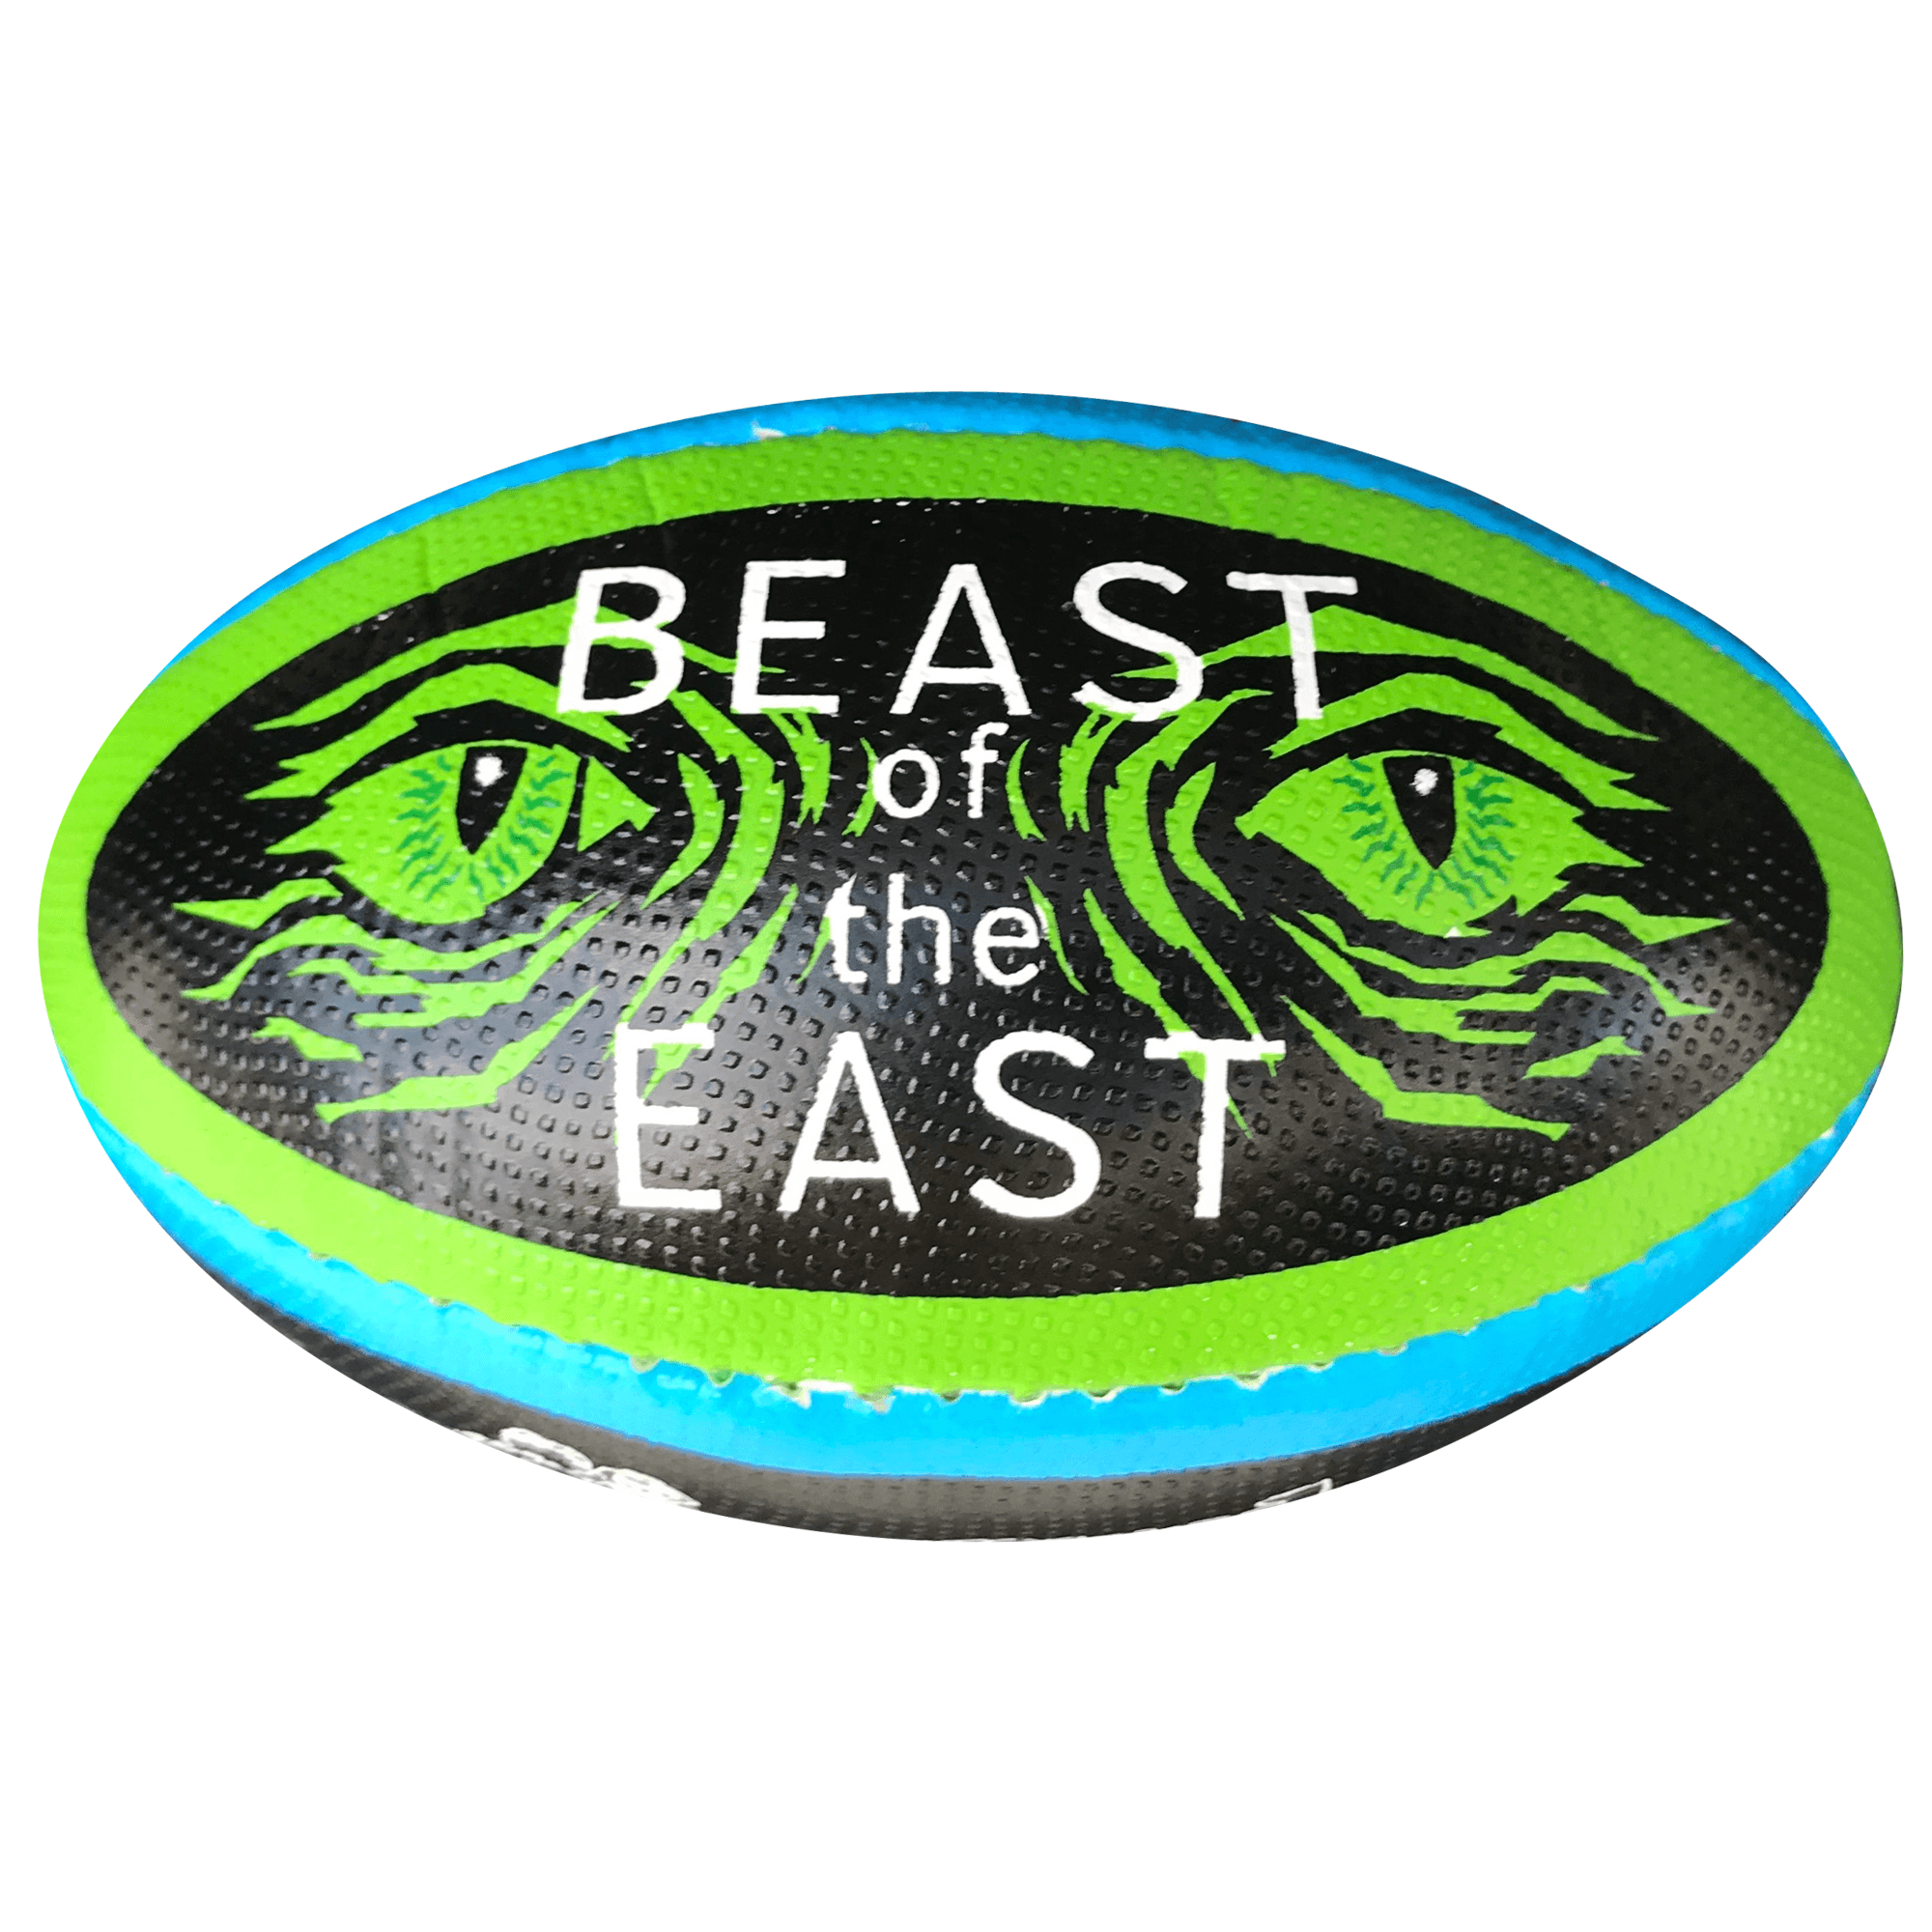 Rugby Imports Beast of the East Mini Rugby Ball